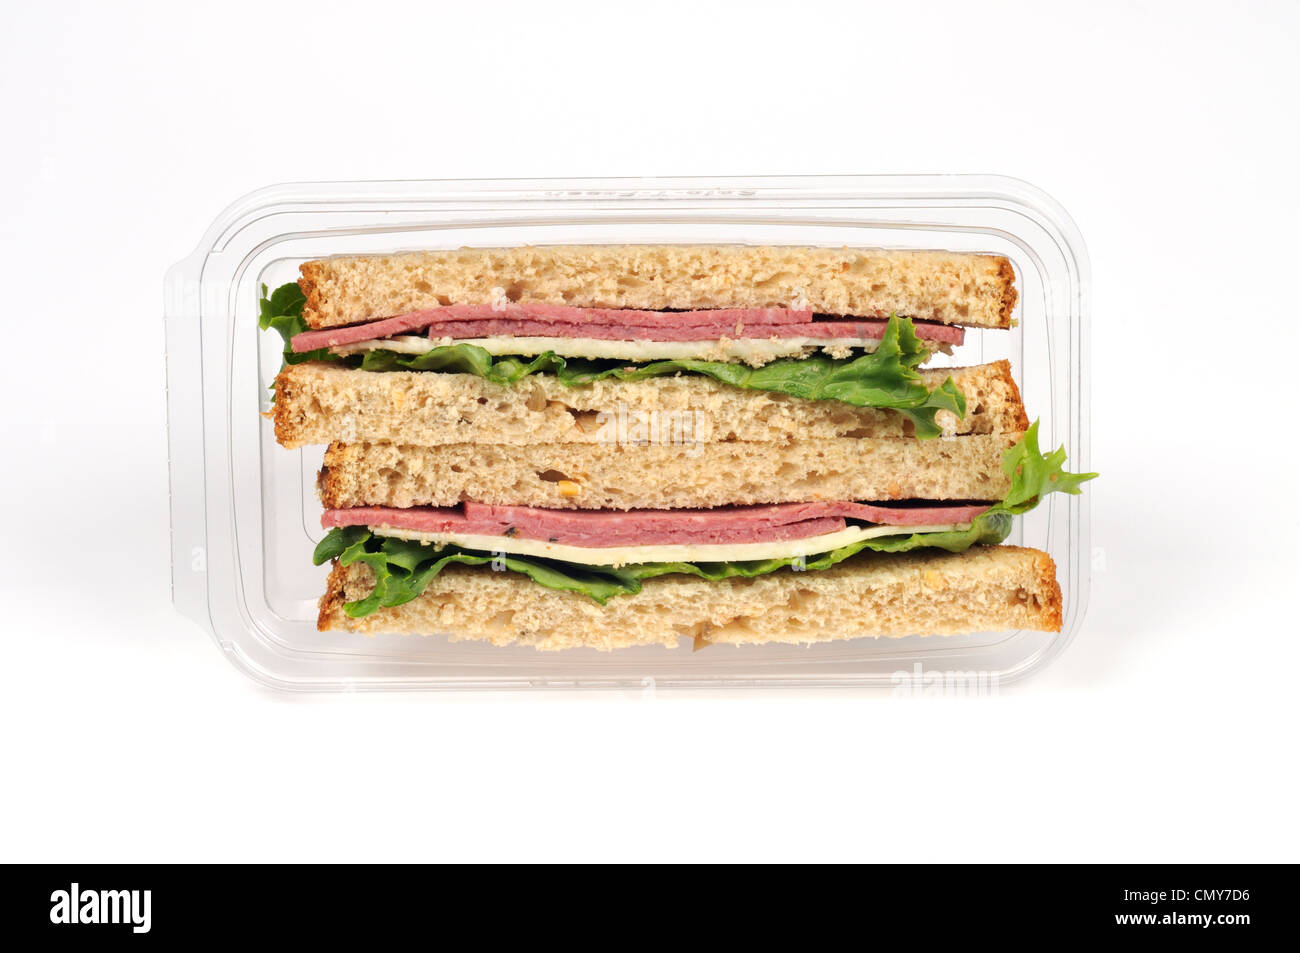 Salami and cheese takeaway sandwich on whole wheat bread with lettuce in packet Stock Photo